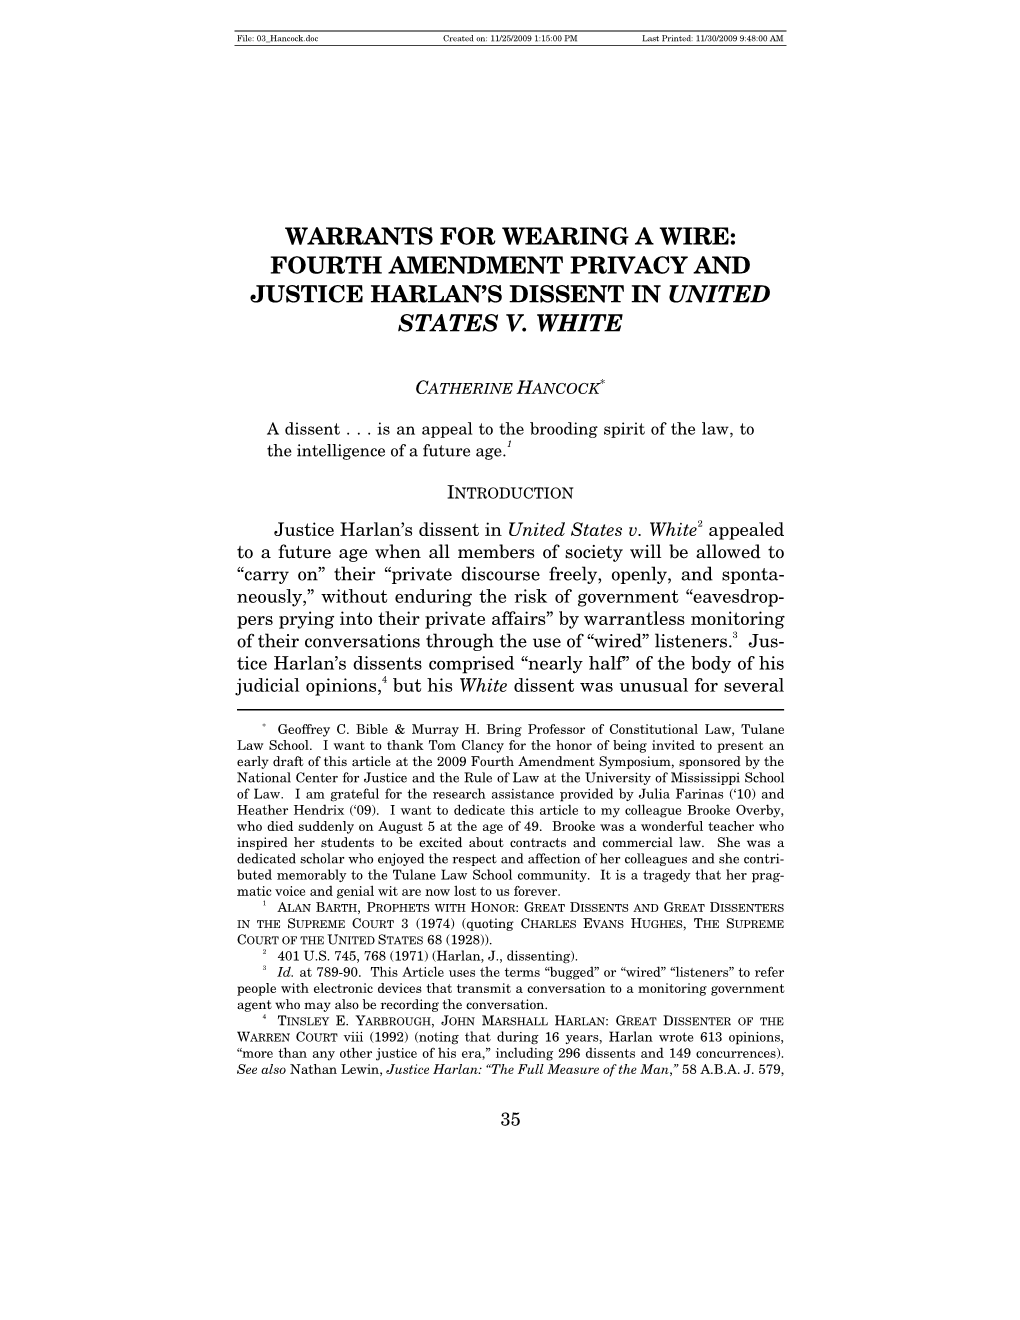 Warrants for Wearing a Wire: Fourth Amendment Privacy and Justice Harlan’S Dissent in United States V